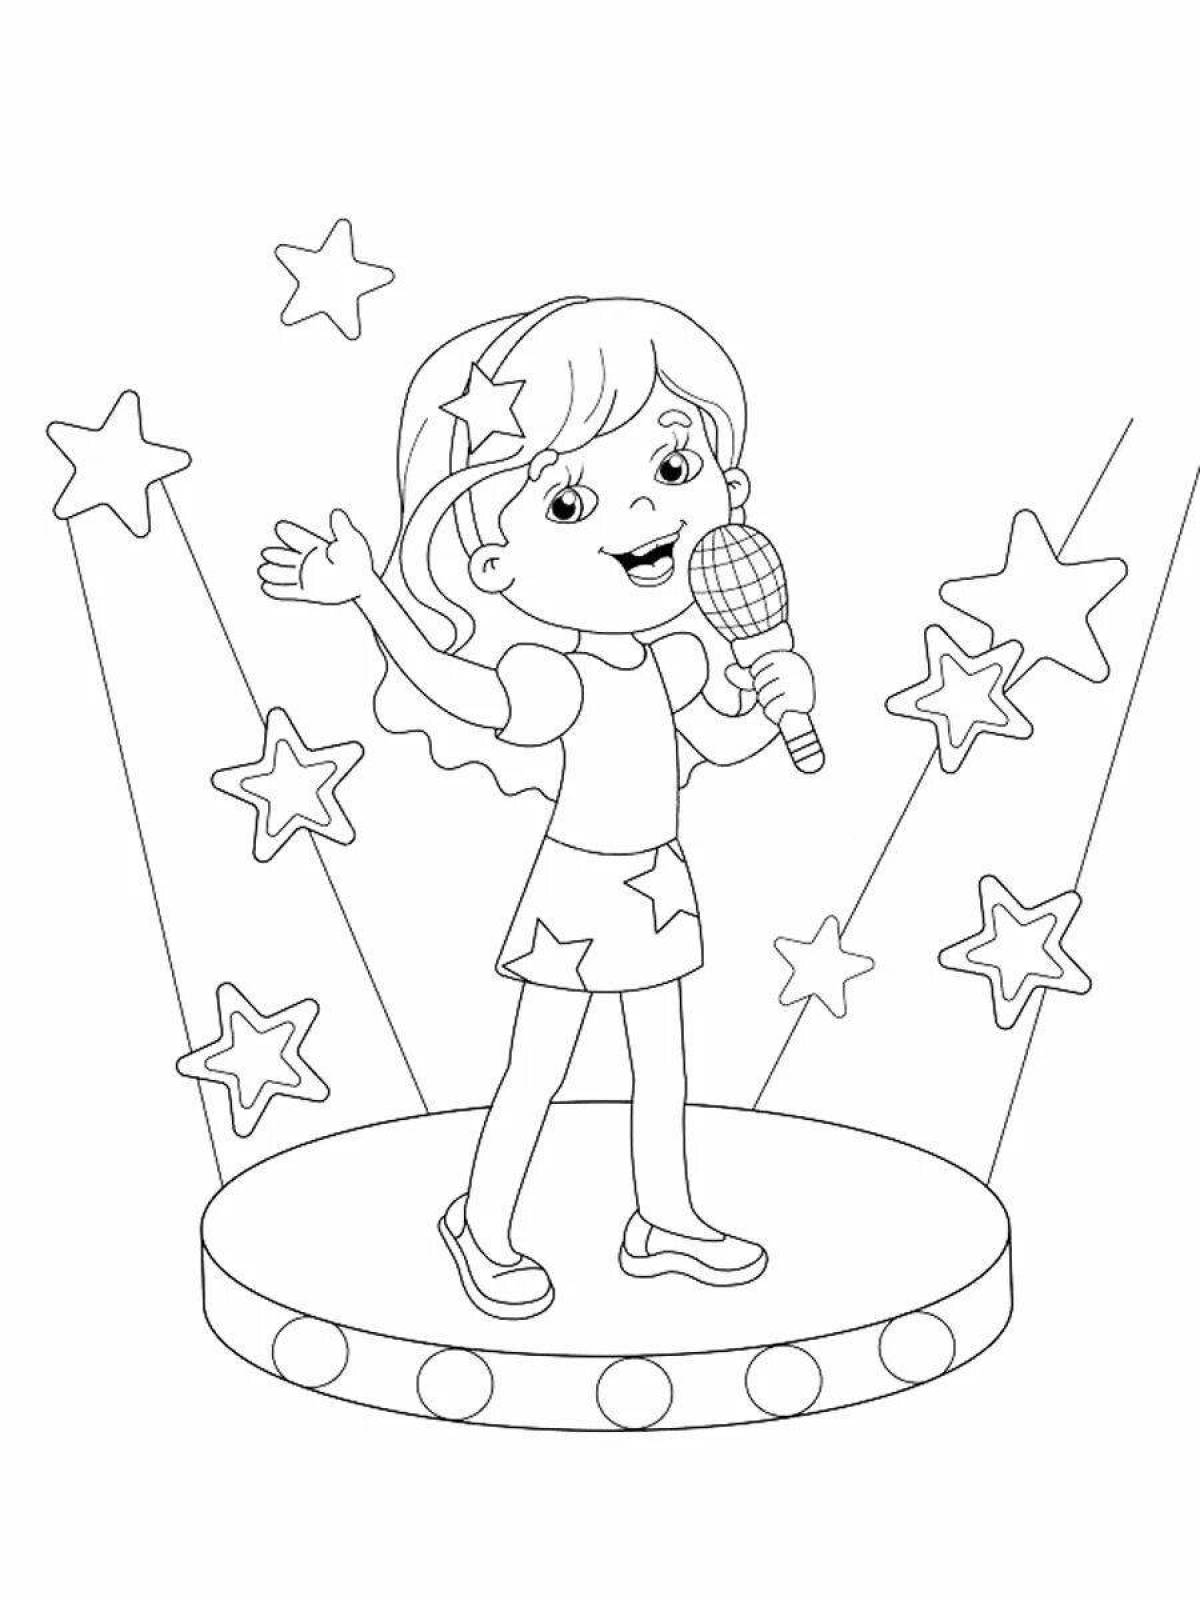 Singing glitter coloring book